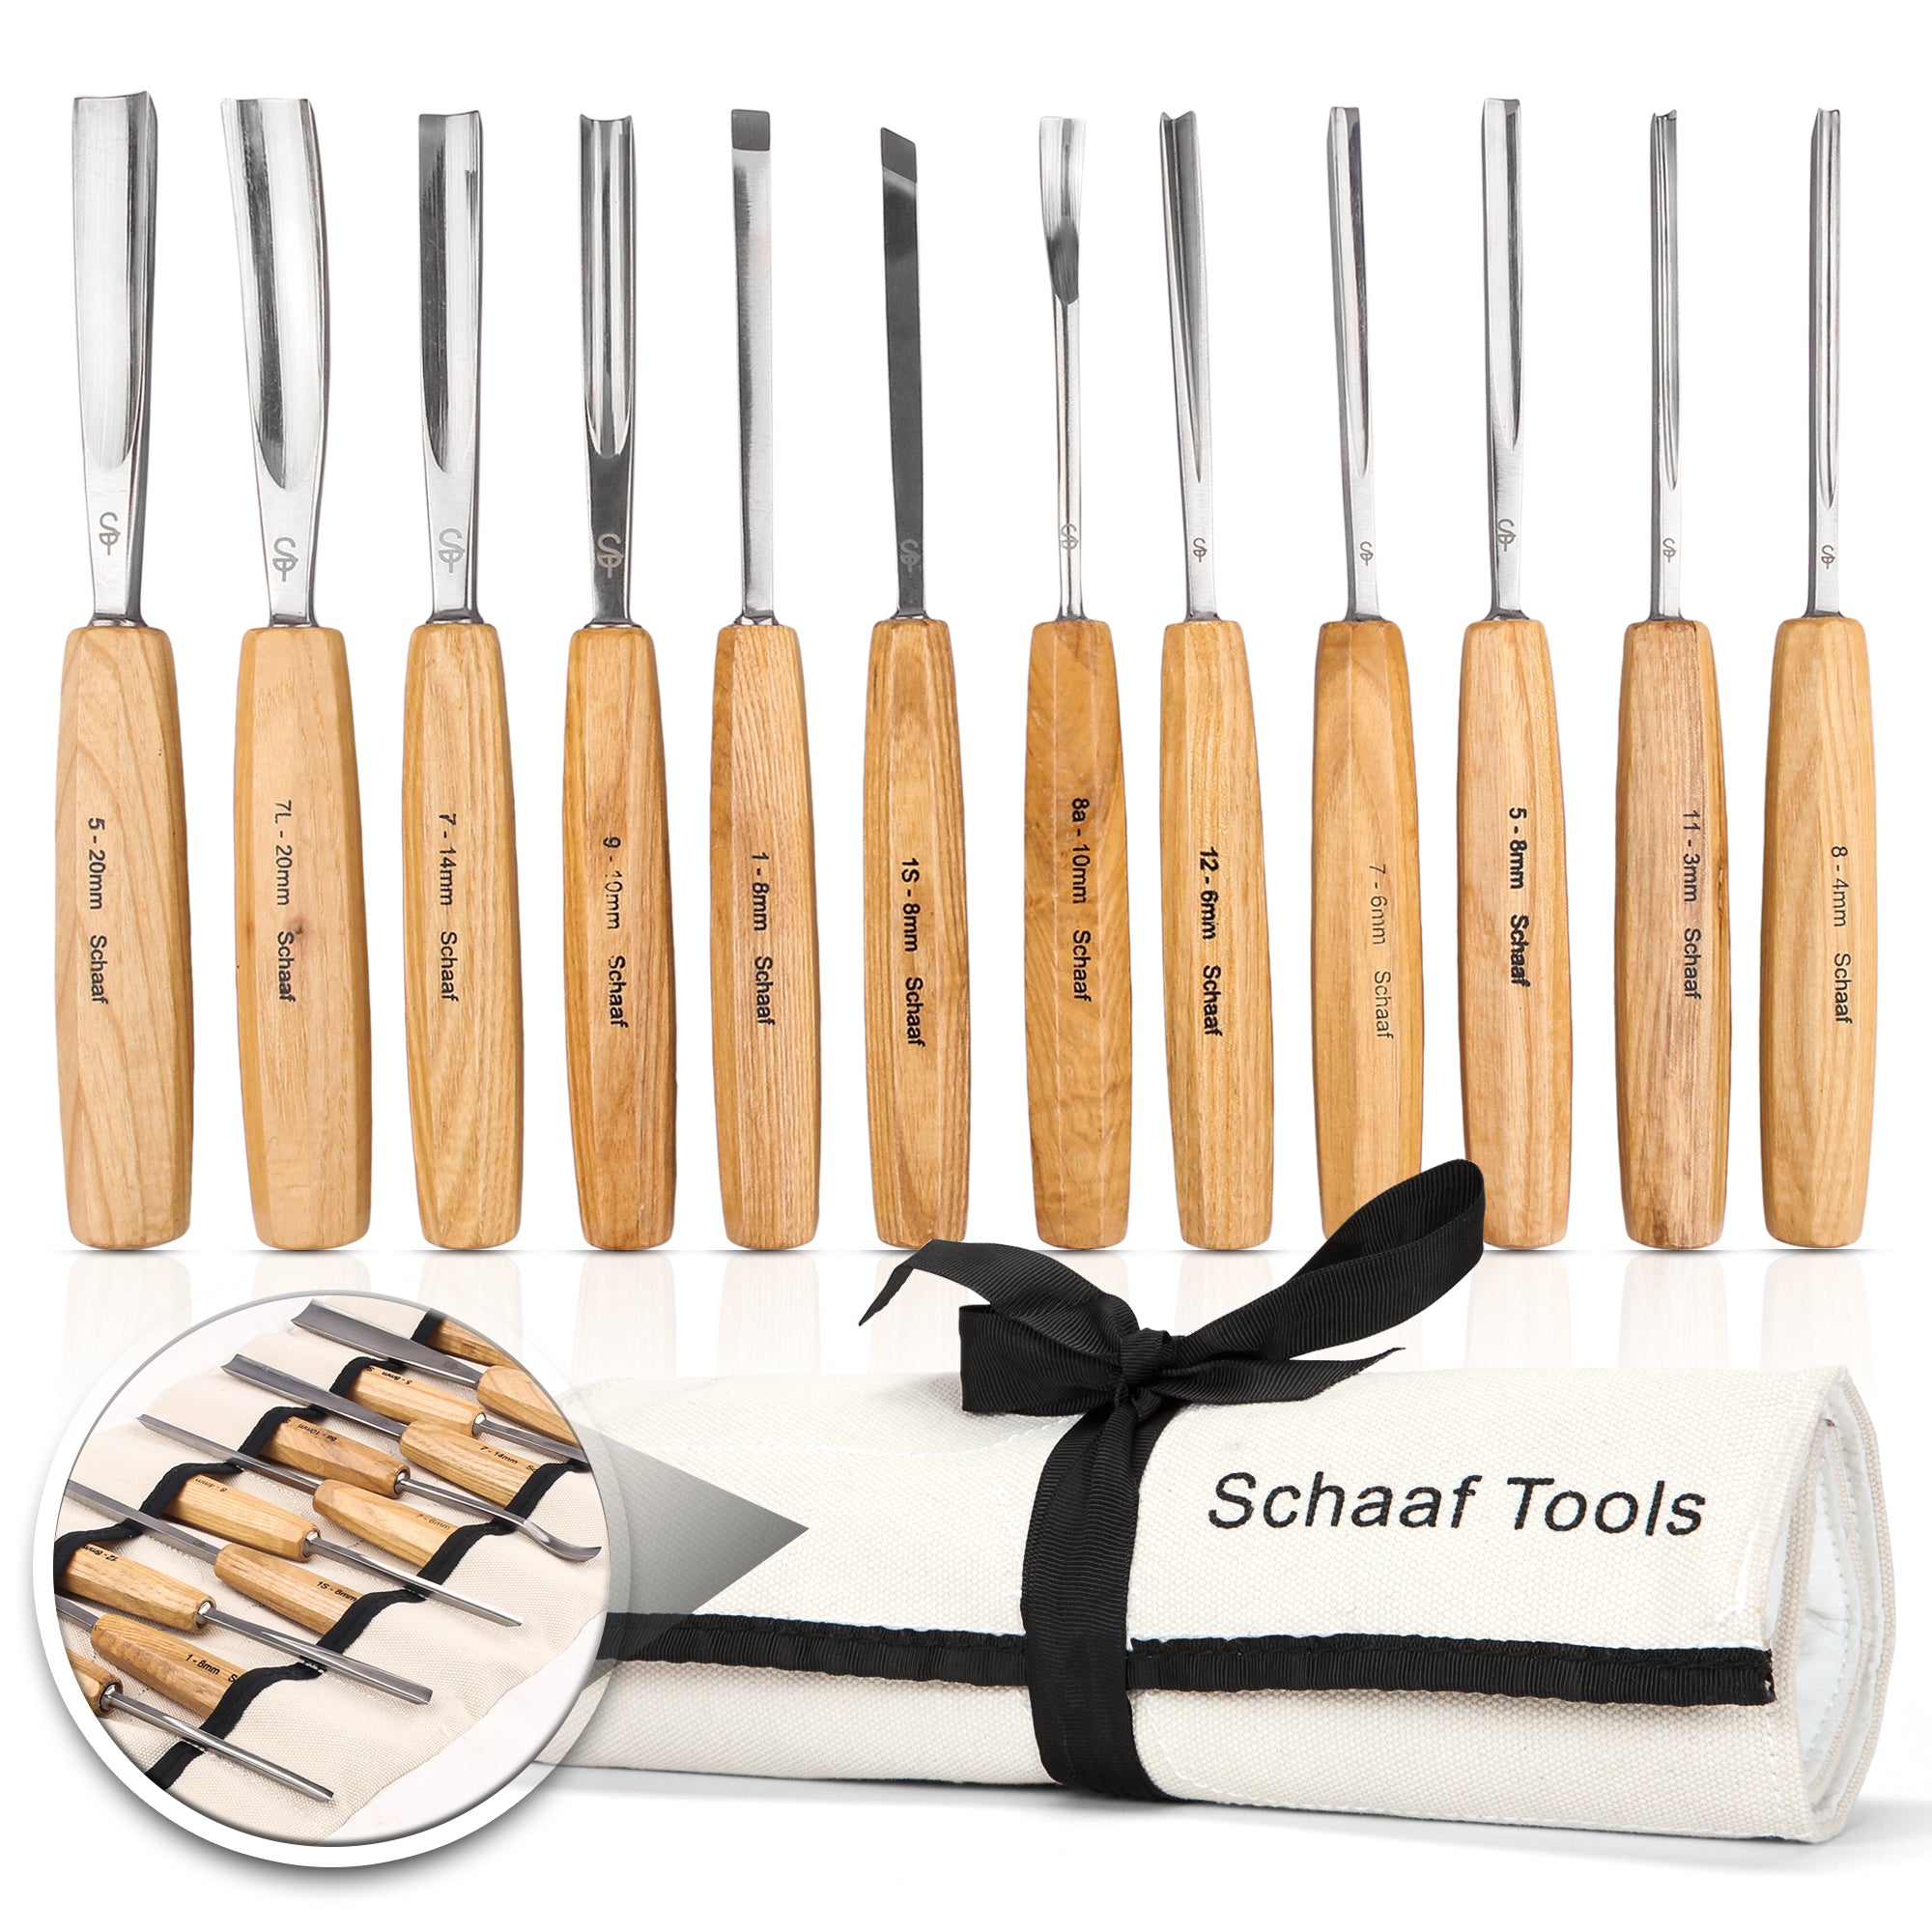 Carving Tool Set - Sculpter's Full Size - 8 Piece